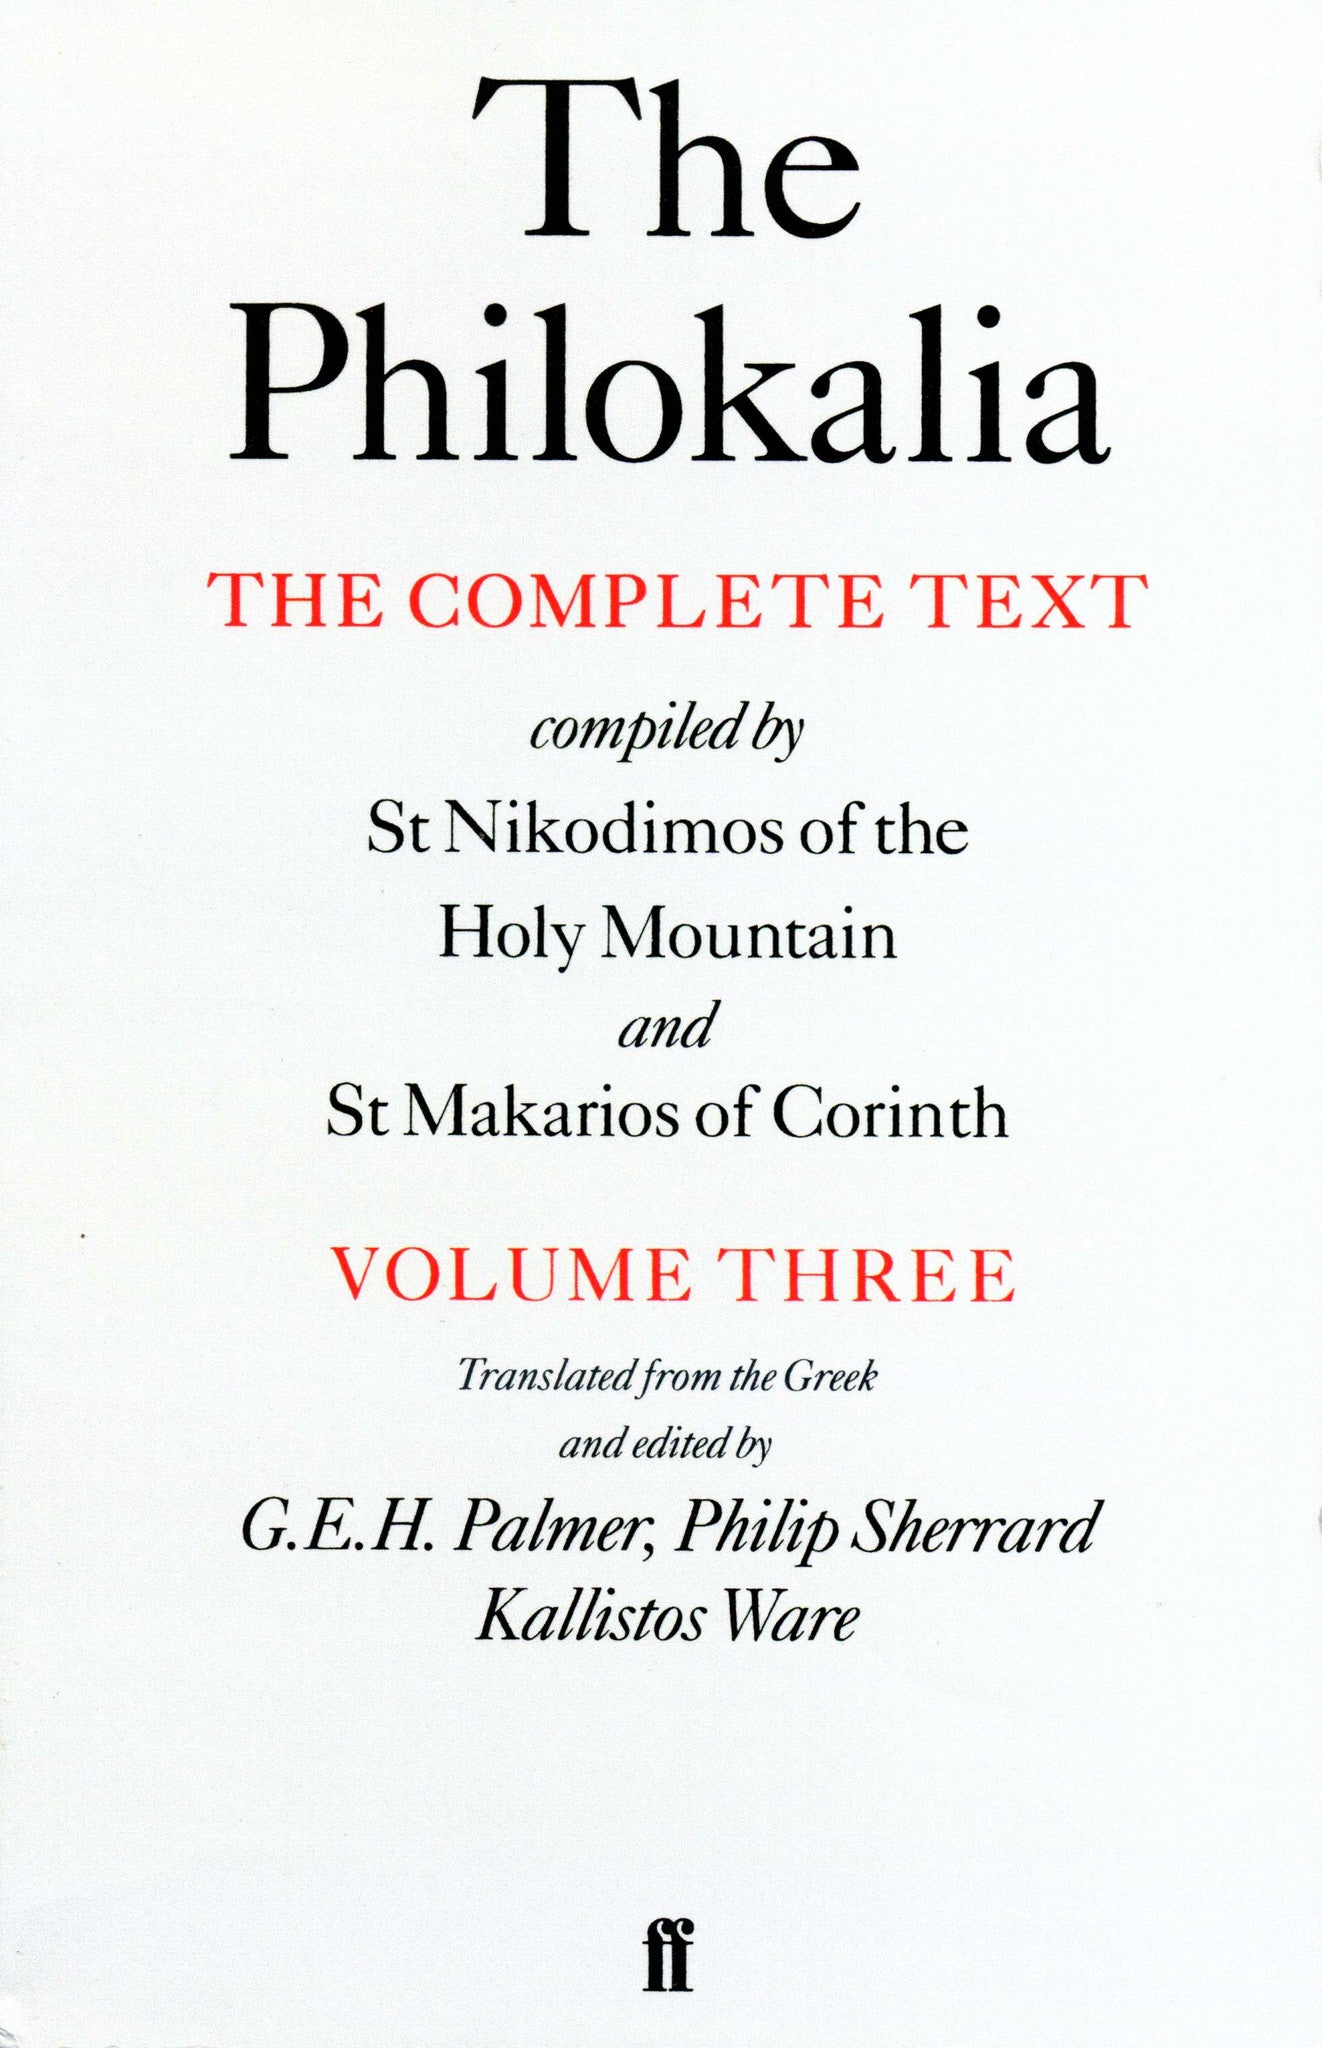 The Philokalia: The Complete Text (Vol. 3): Compiled by St. Nikodimos of the Holy Mountain and St. Makarios of Corinth